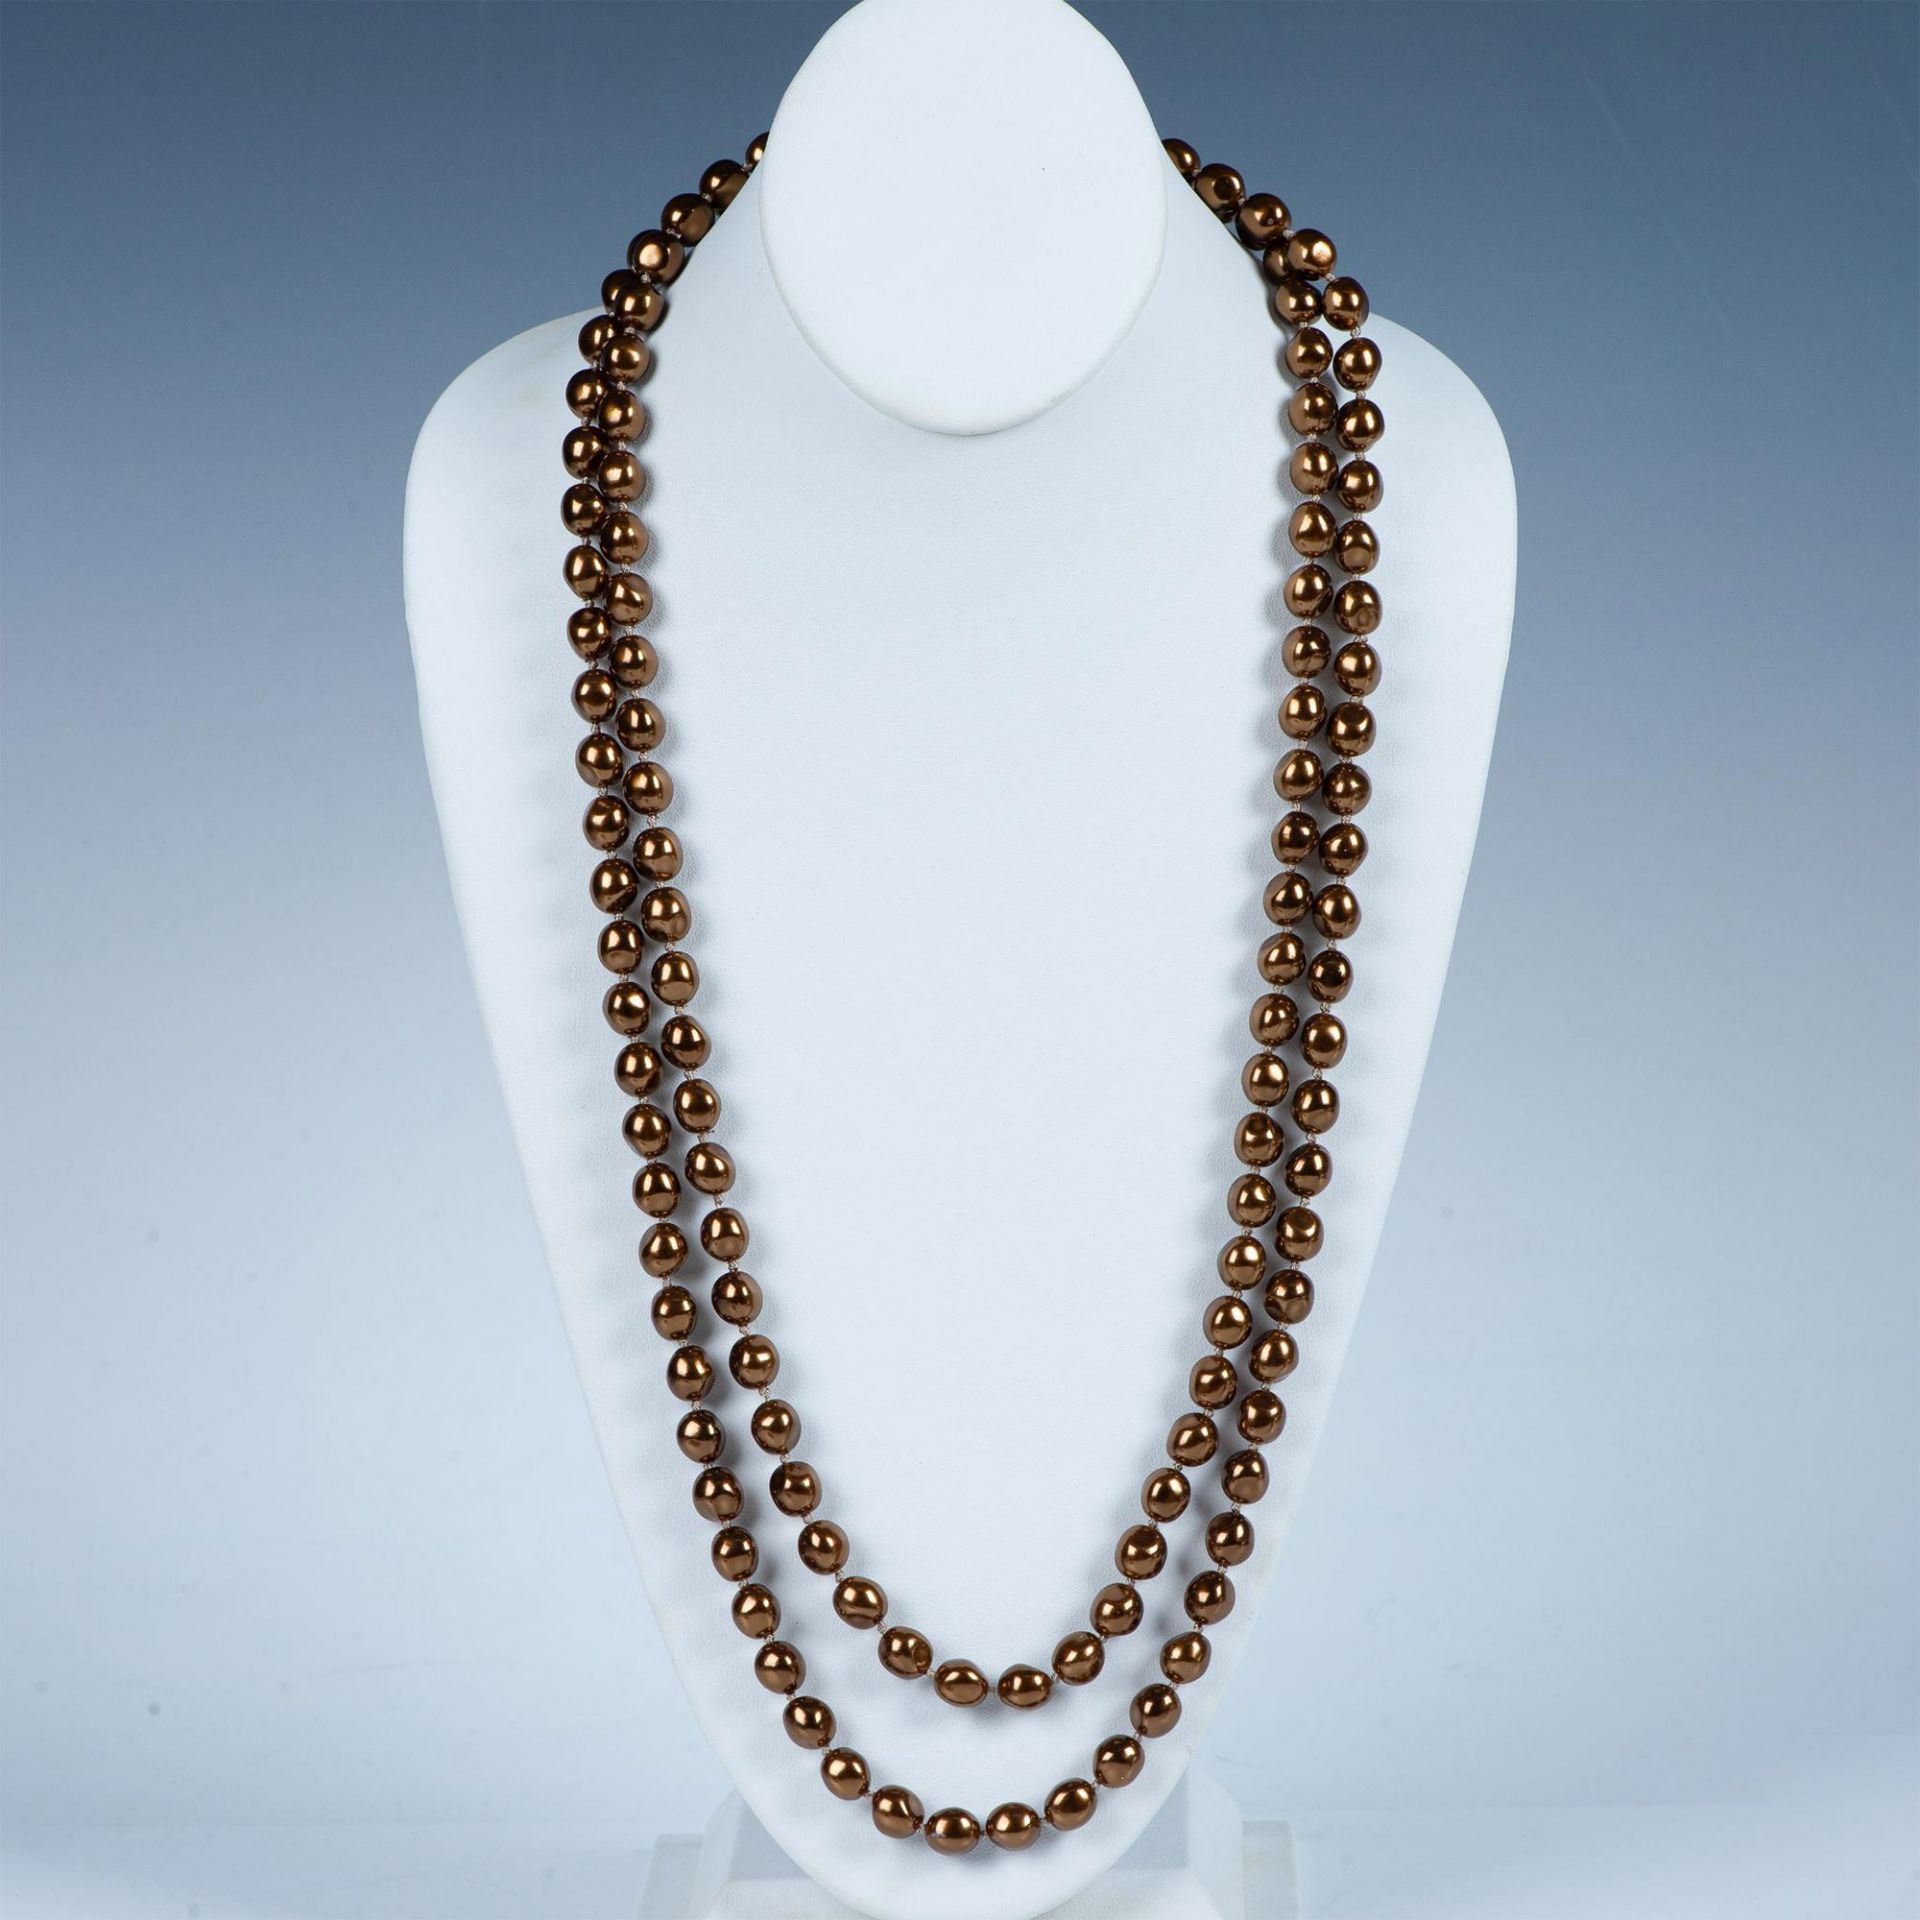 2pc Bronze Faux Baroque Pearl Necklaces - Image 2 of 7